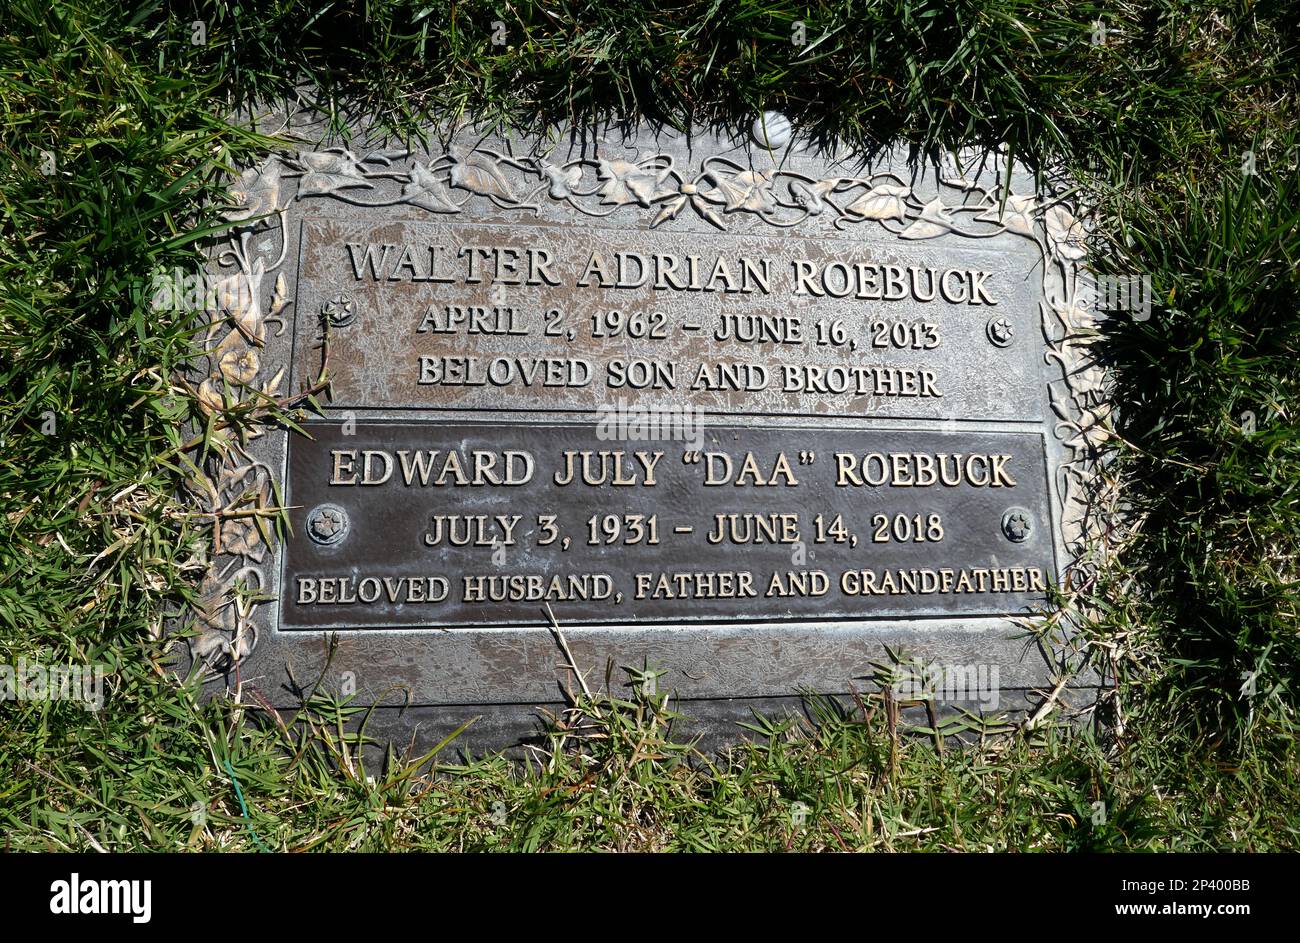 Long Beach, California, USA 2nd March 2023 Major League Baseball Player Ed Roebuck's Grave in Bouvardia section at Forest Lawn Long Beach Memorial Park Cemetery on March 2, 2023 in Long Beach, California, USA. Photo by Barry King/Alamy Stock Photo Stock Photo